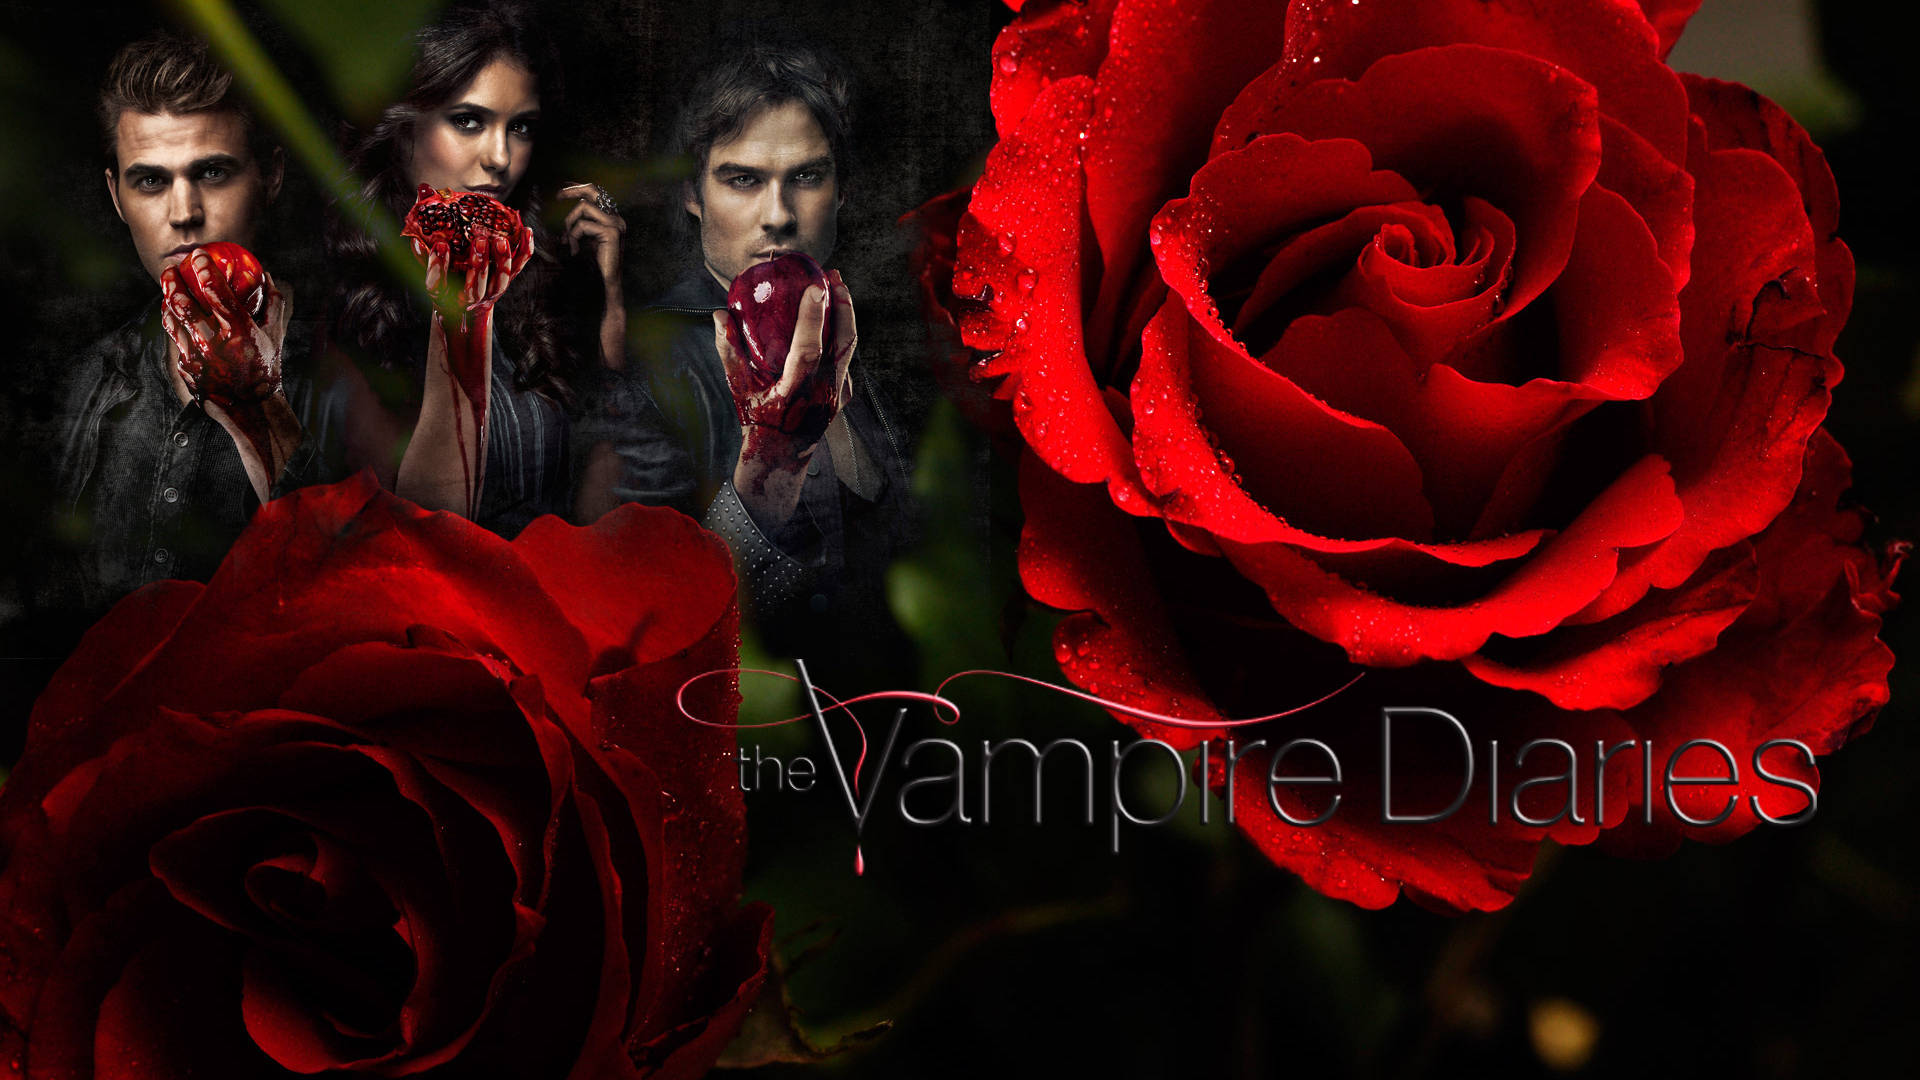 The Vampire Diaries Poster With Red Roses Background